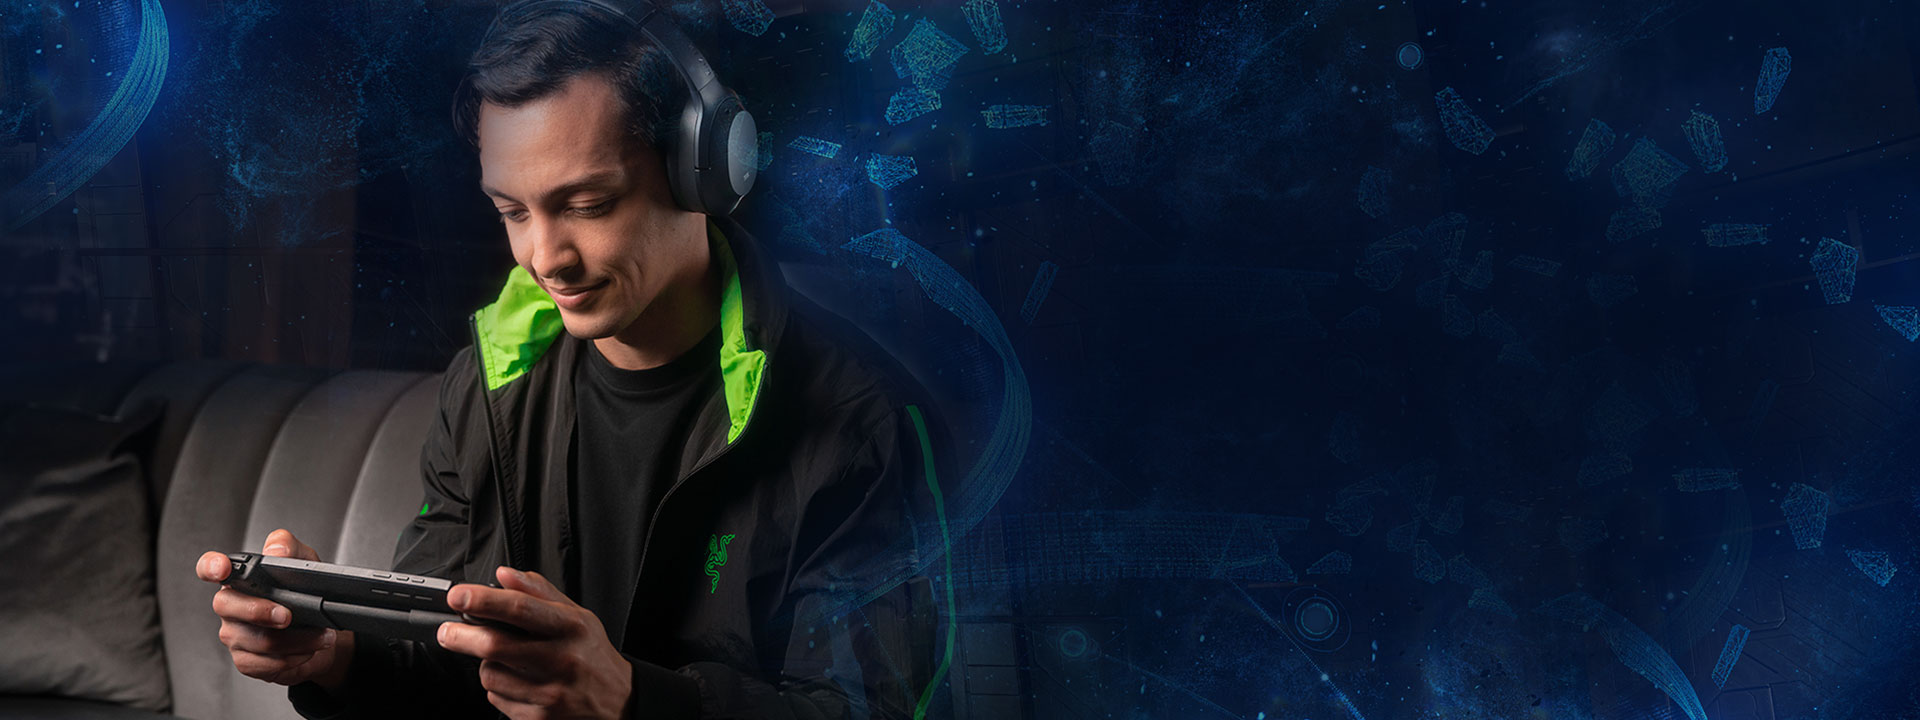 Man on a couch wearing headphones and playing the Razer Edge.